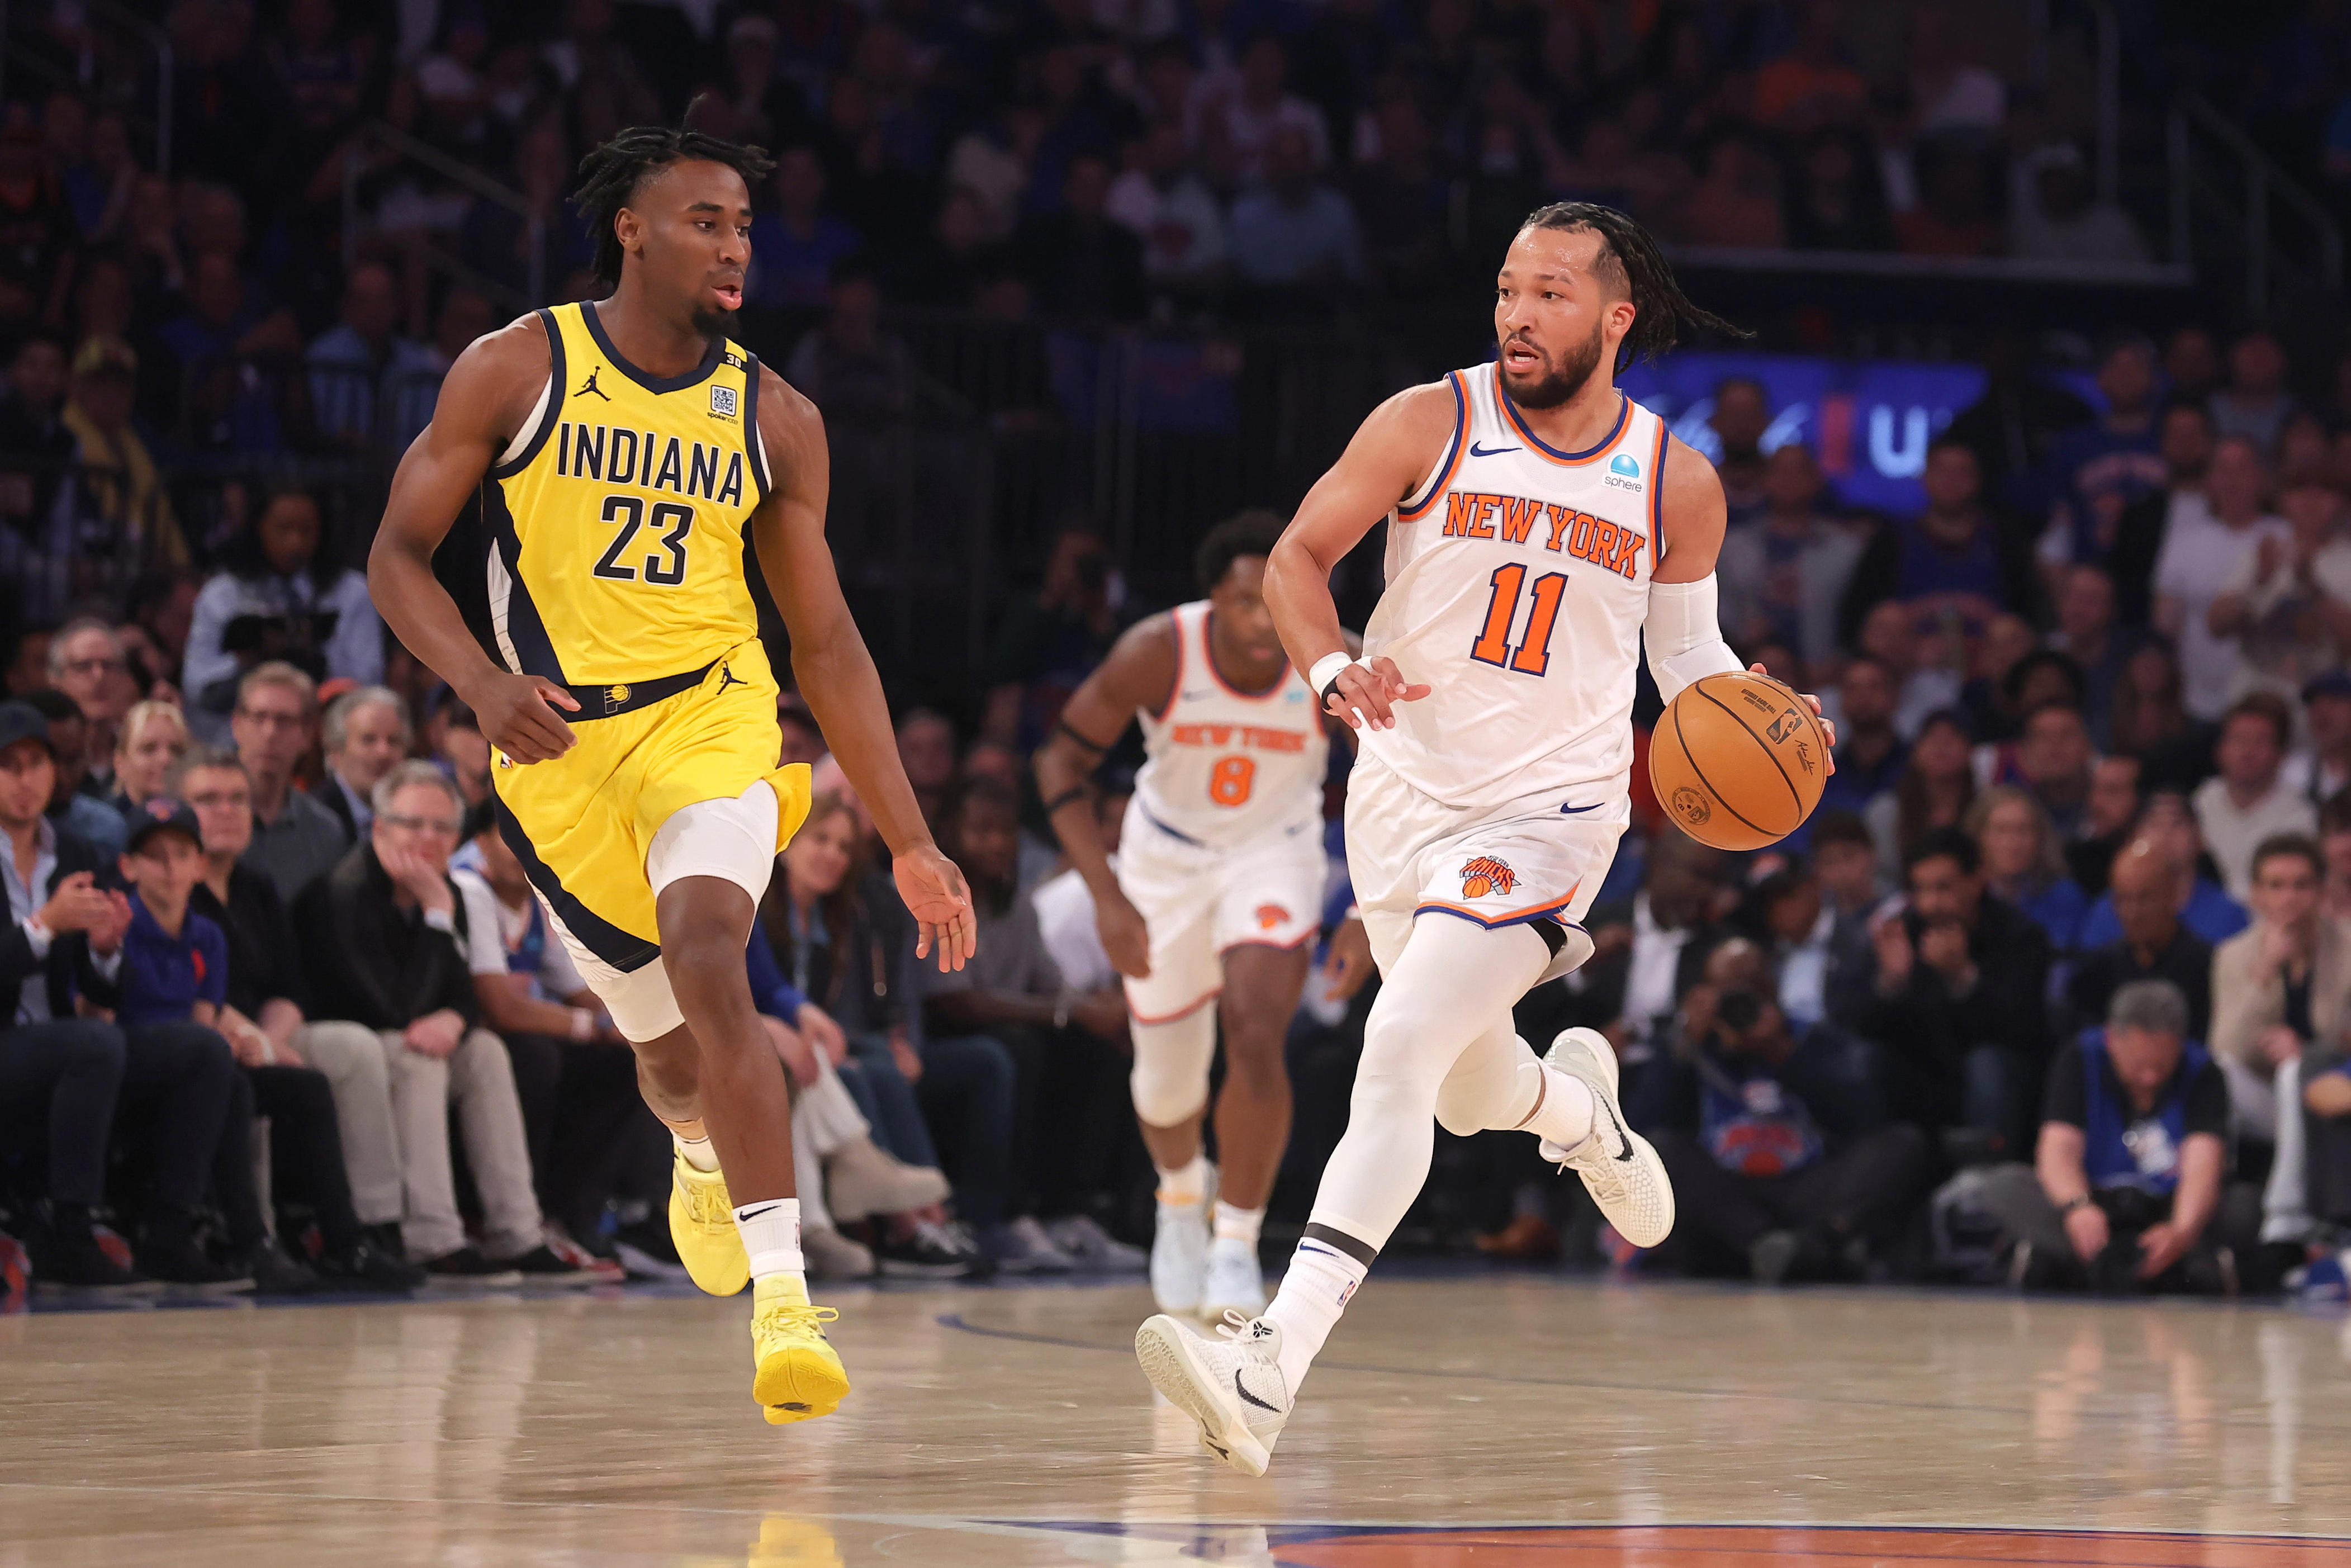 jalen brunson helps new york knicks rally for game 1 win over indiana pacers